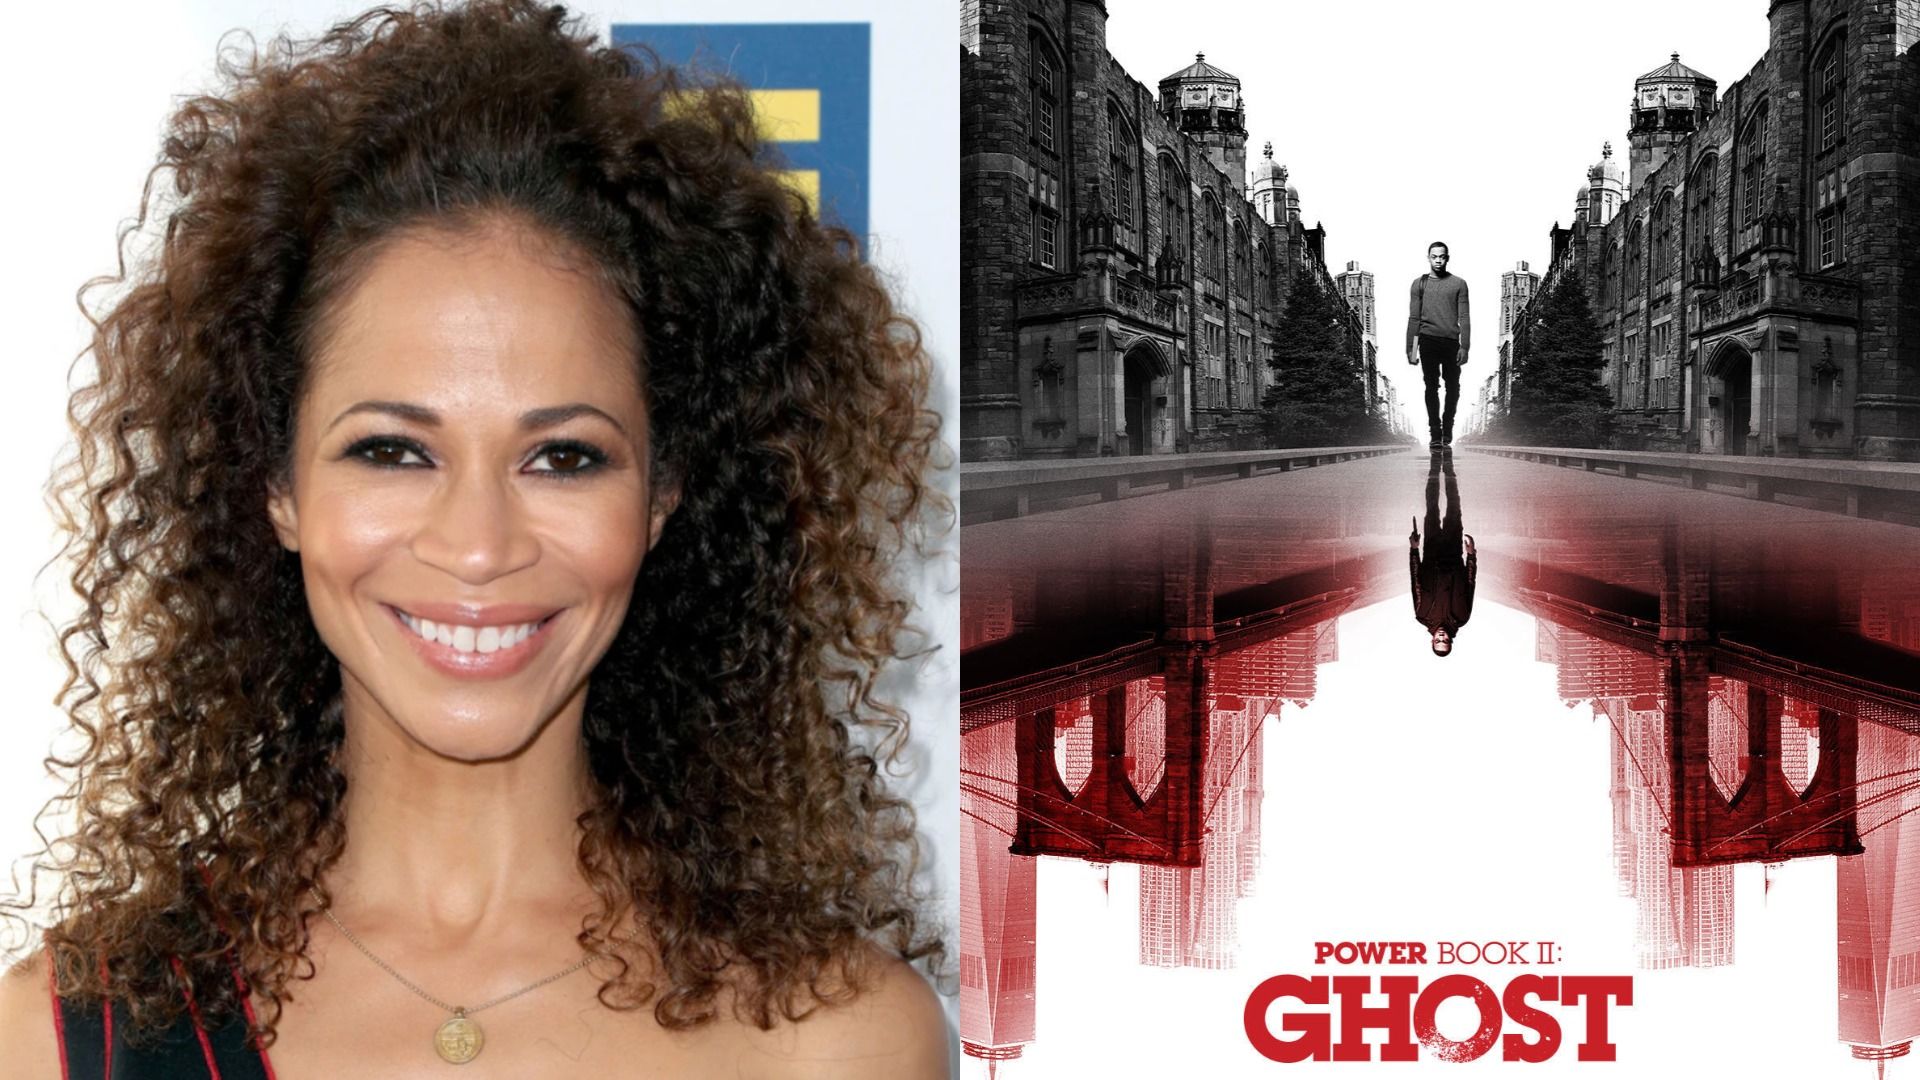 Power Book II Ghost: Sherri Saum Joins Cast For Power Spinoff Series At Starz